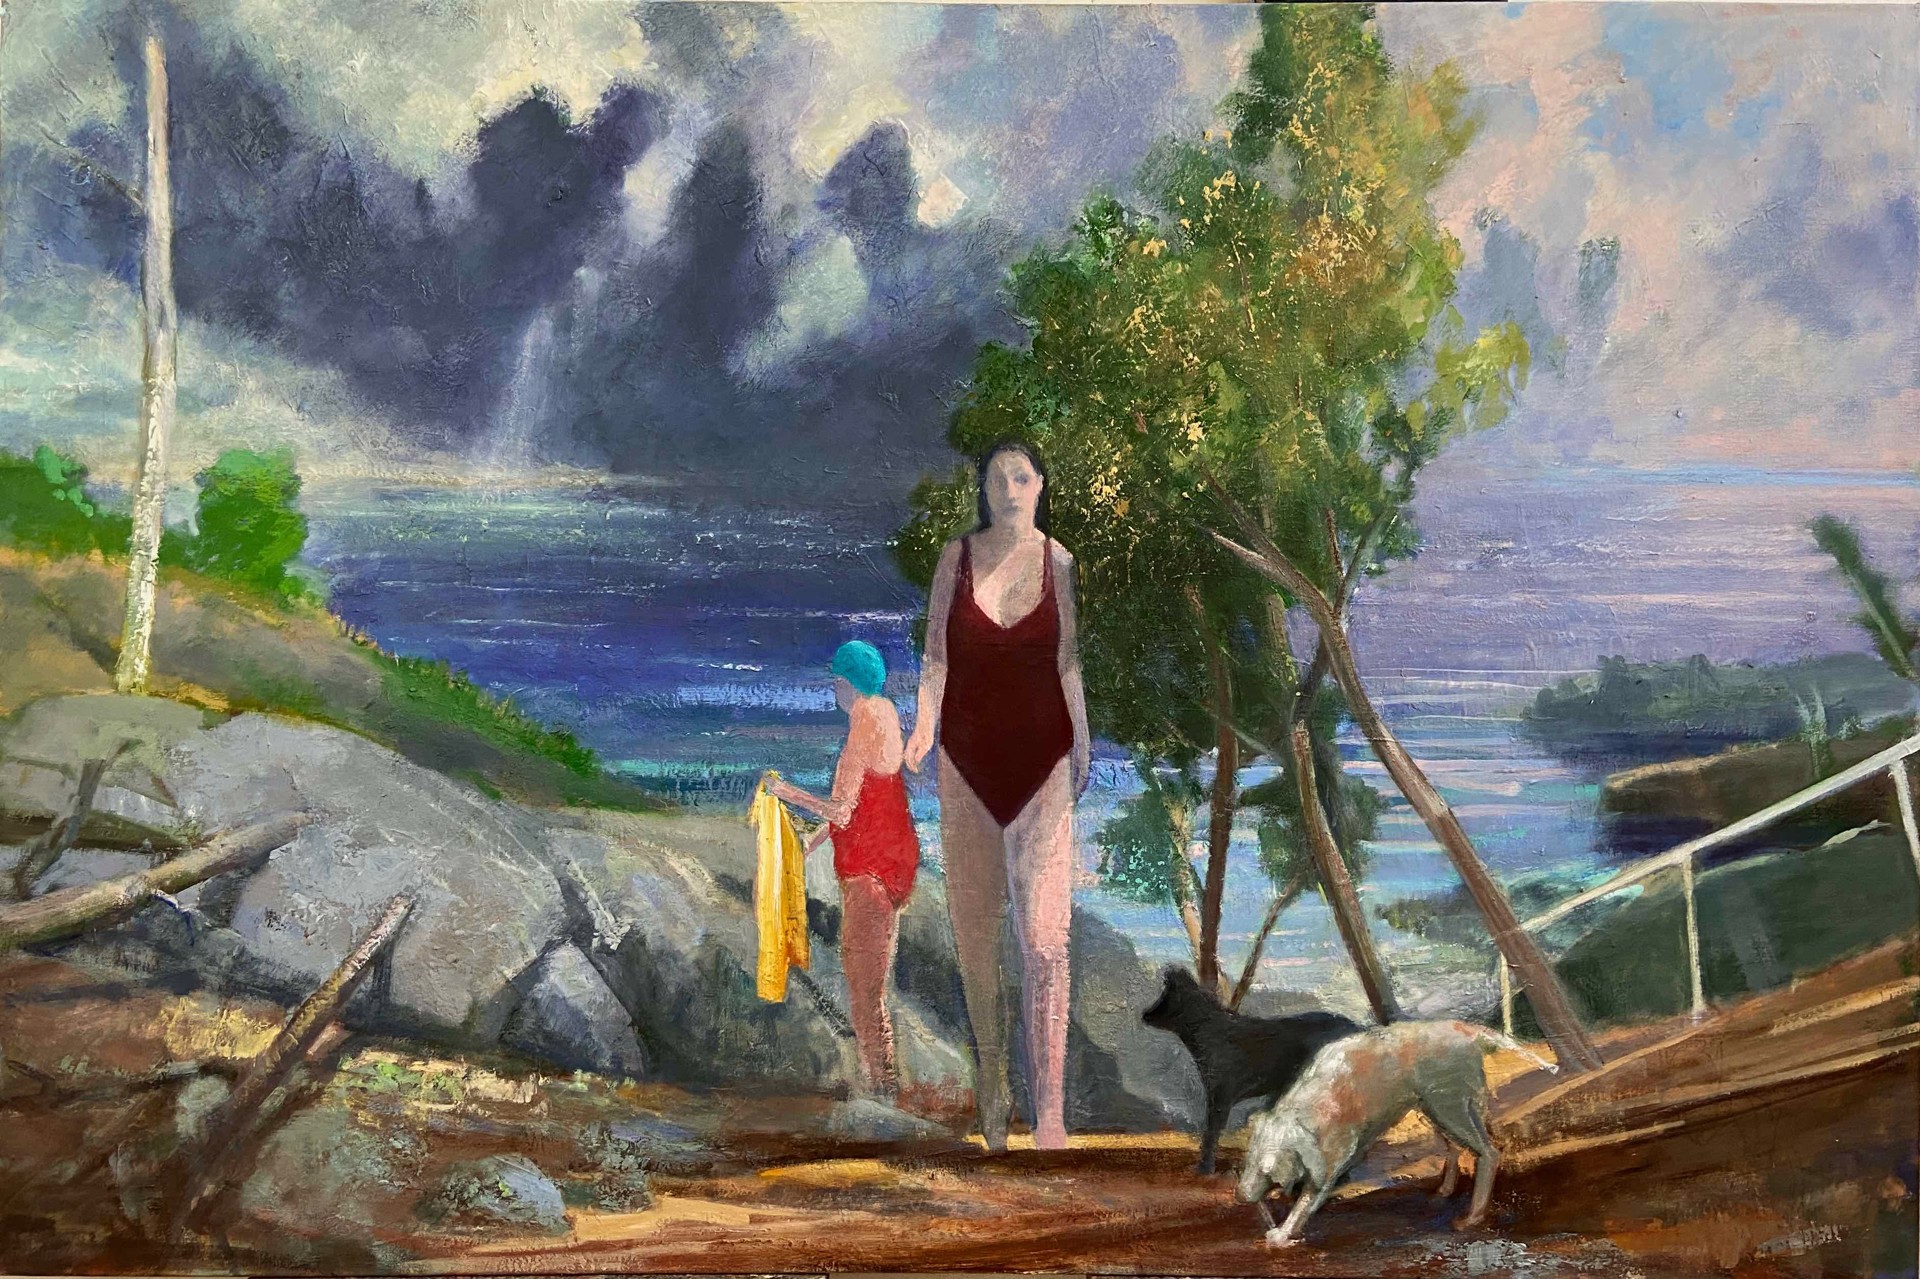 Bathers at the Swimming Place by Donald Beal